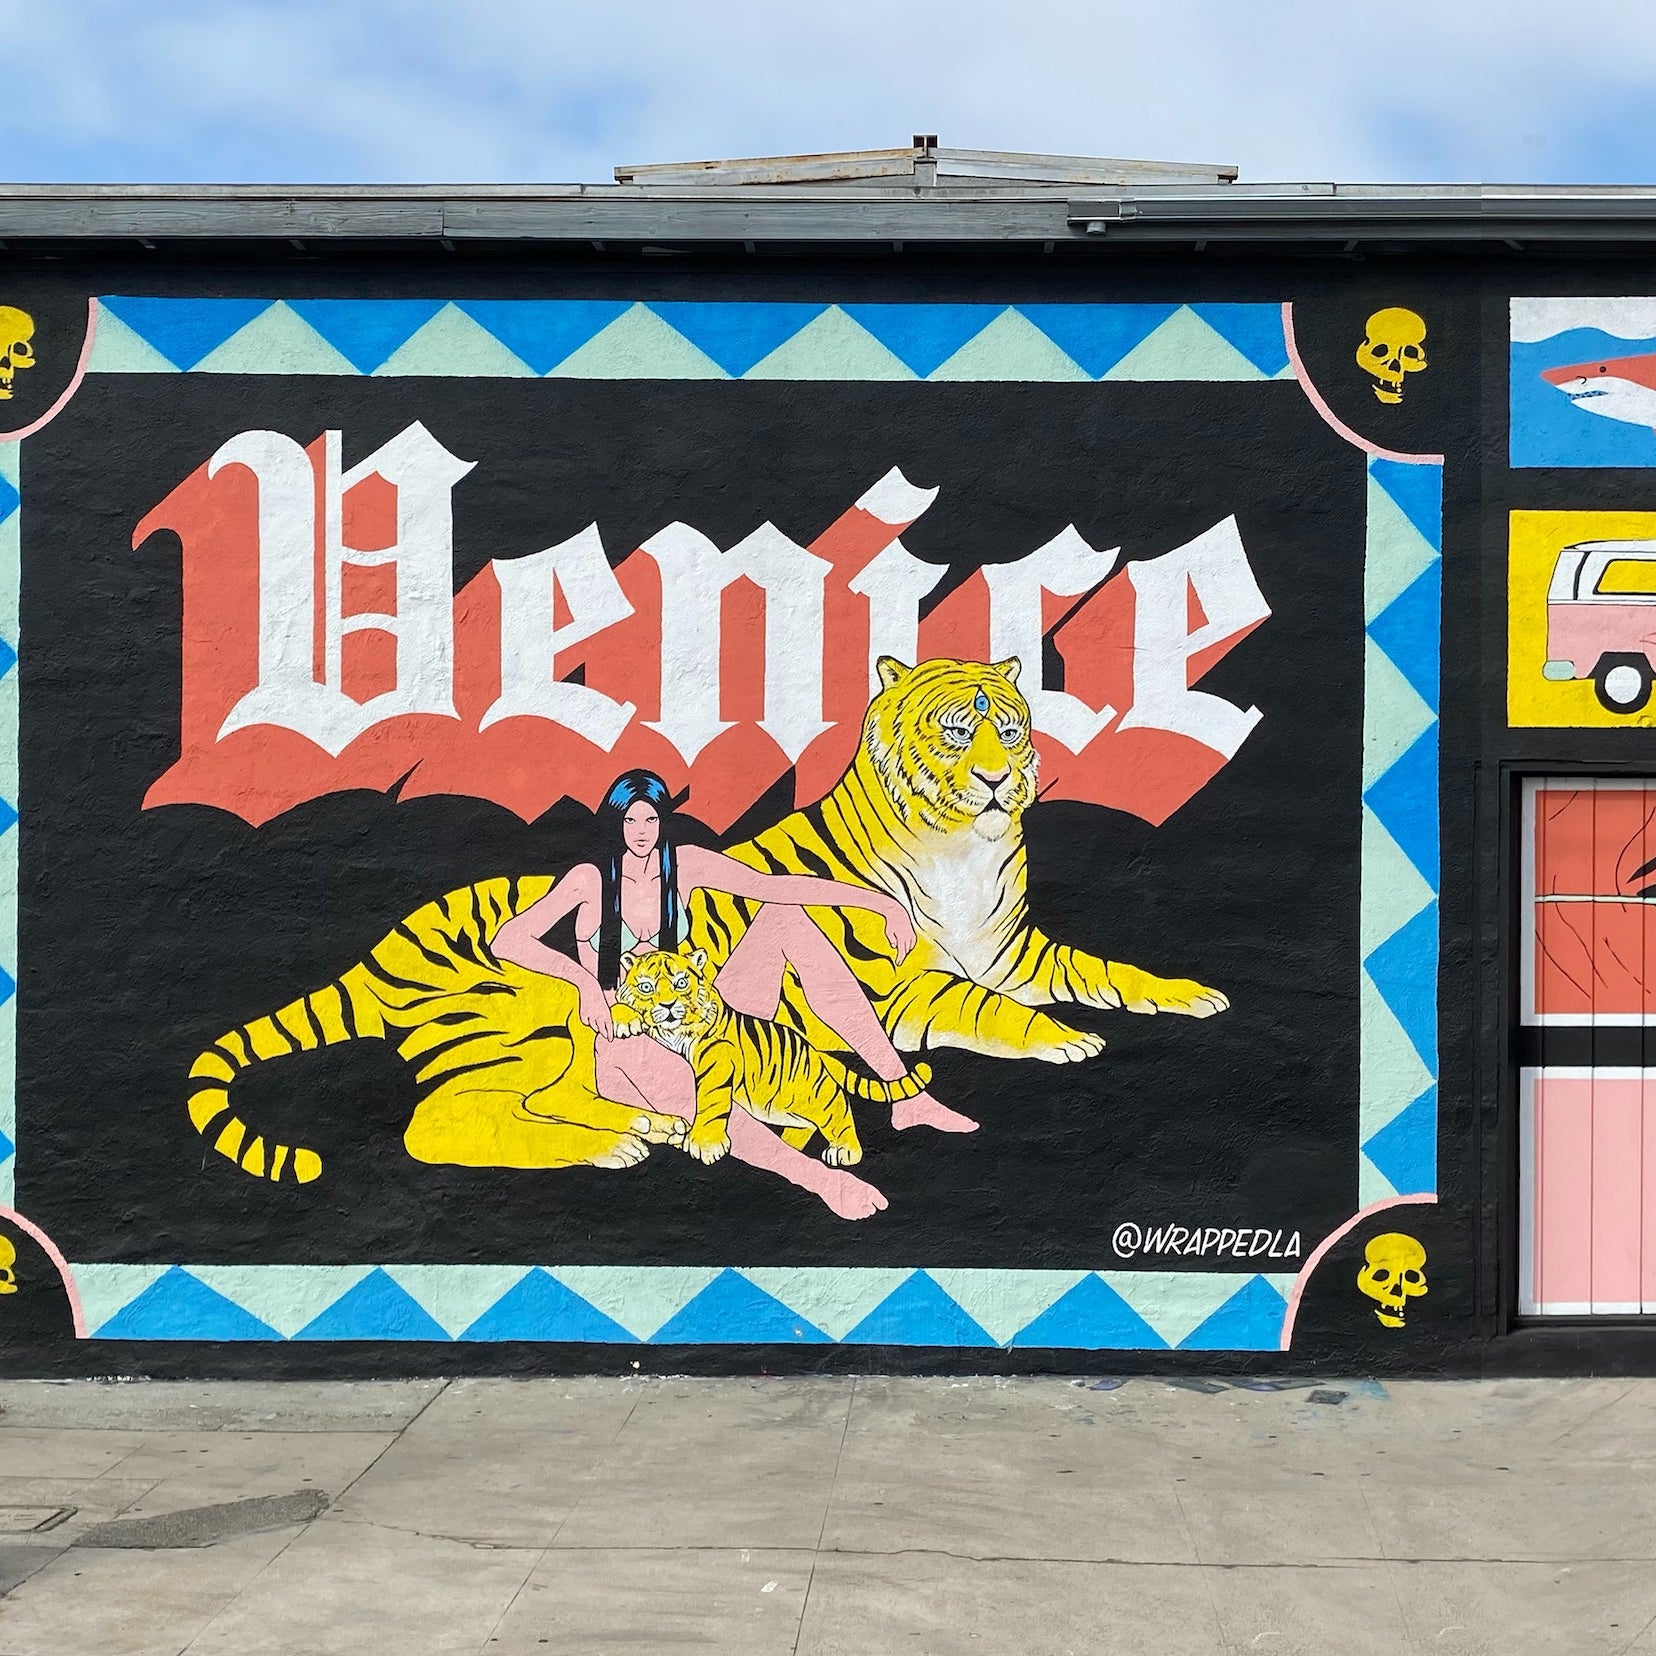 A segment of the Venice mural showcasing the 'Venice' lettering with a lifelike tiger and figure, reflecting the community's rich and diverse artistic heritage.